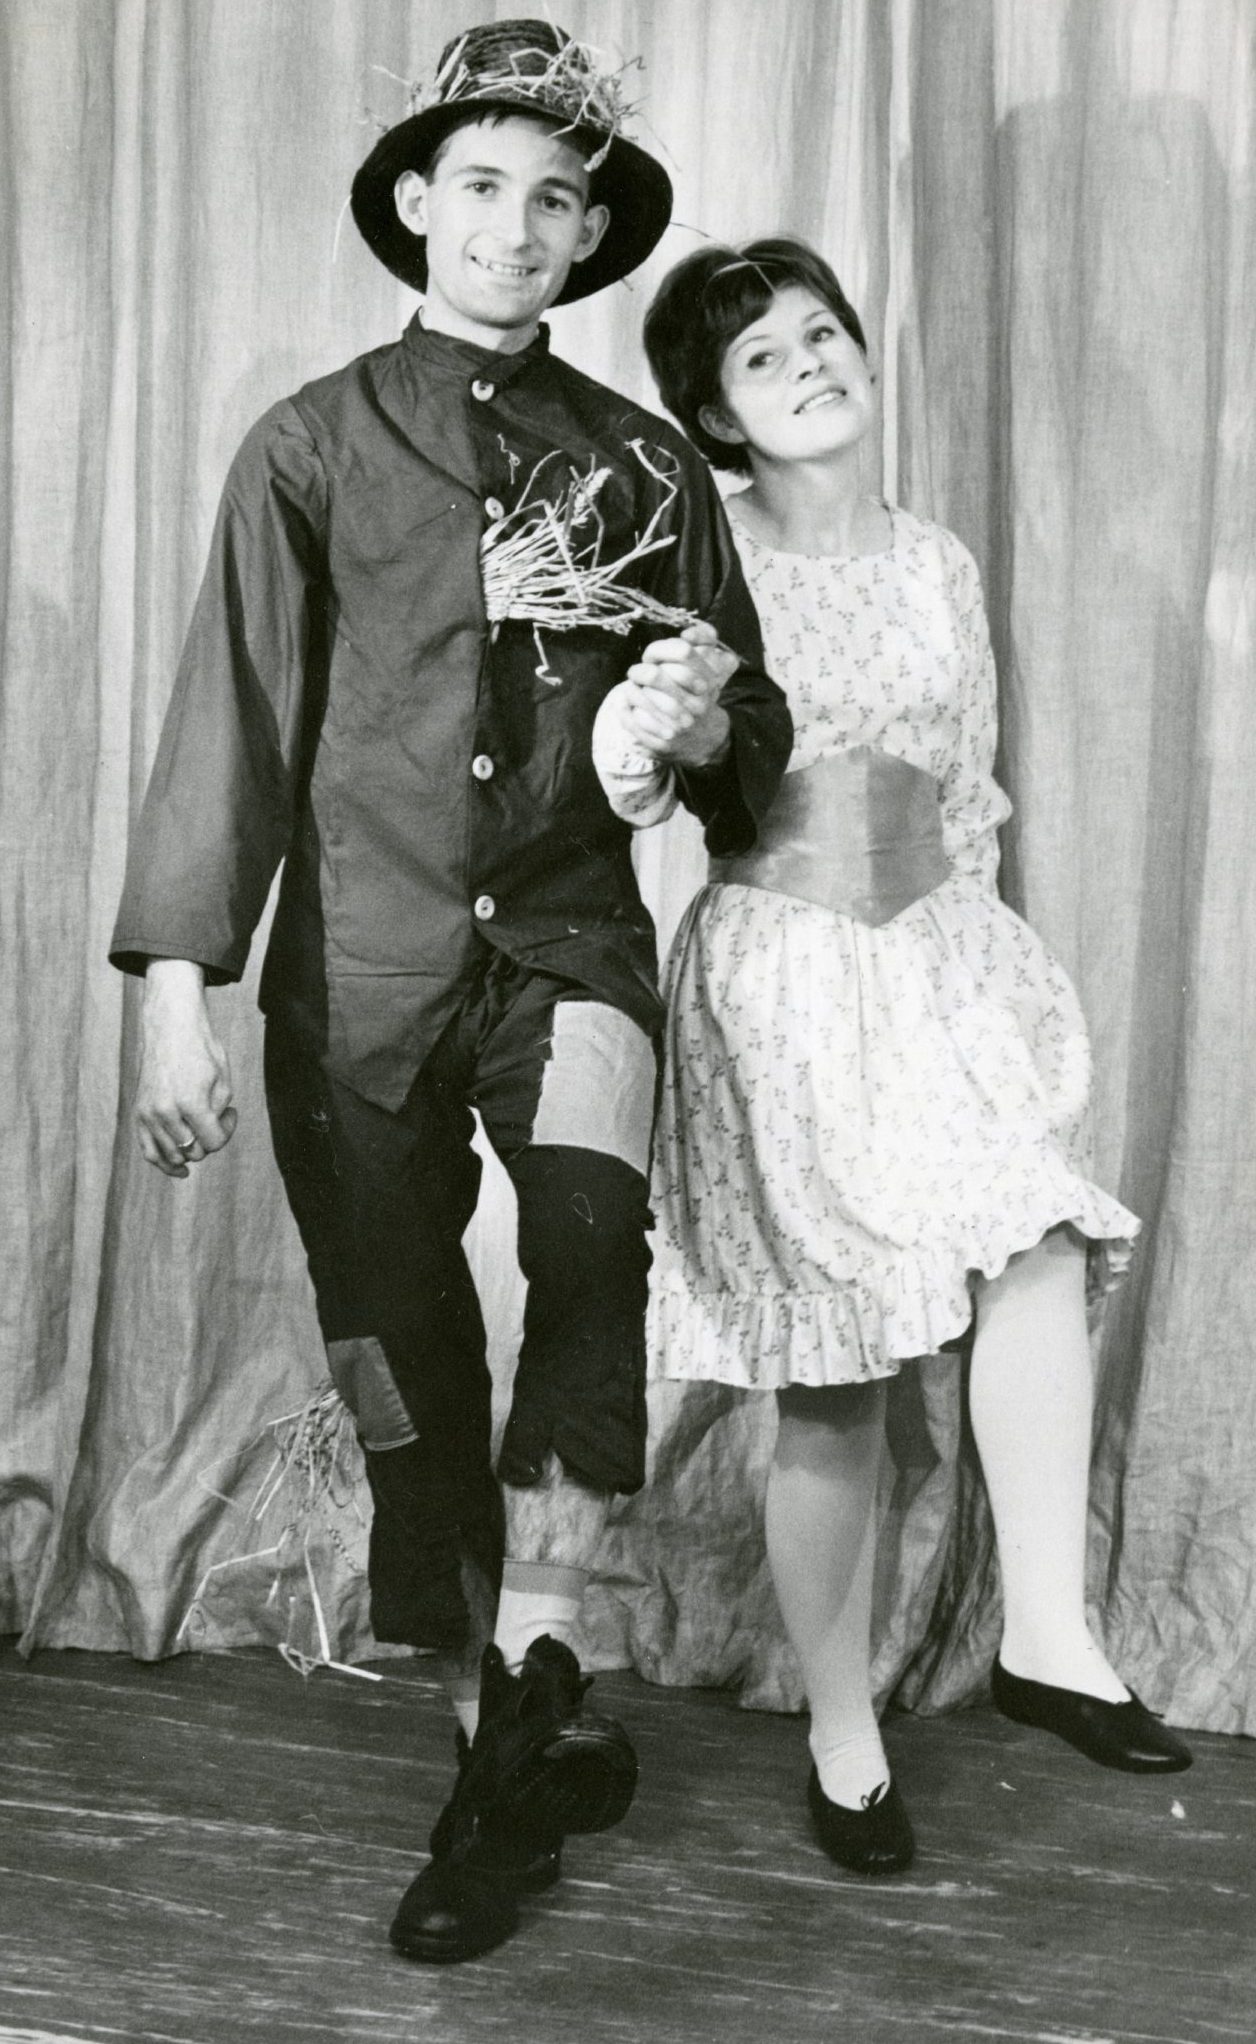 Scarecrow (Roger Buist) and Dorothy (Sheena Cargill) in costume in 1966. 